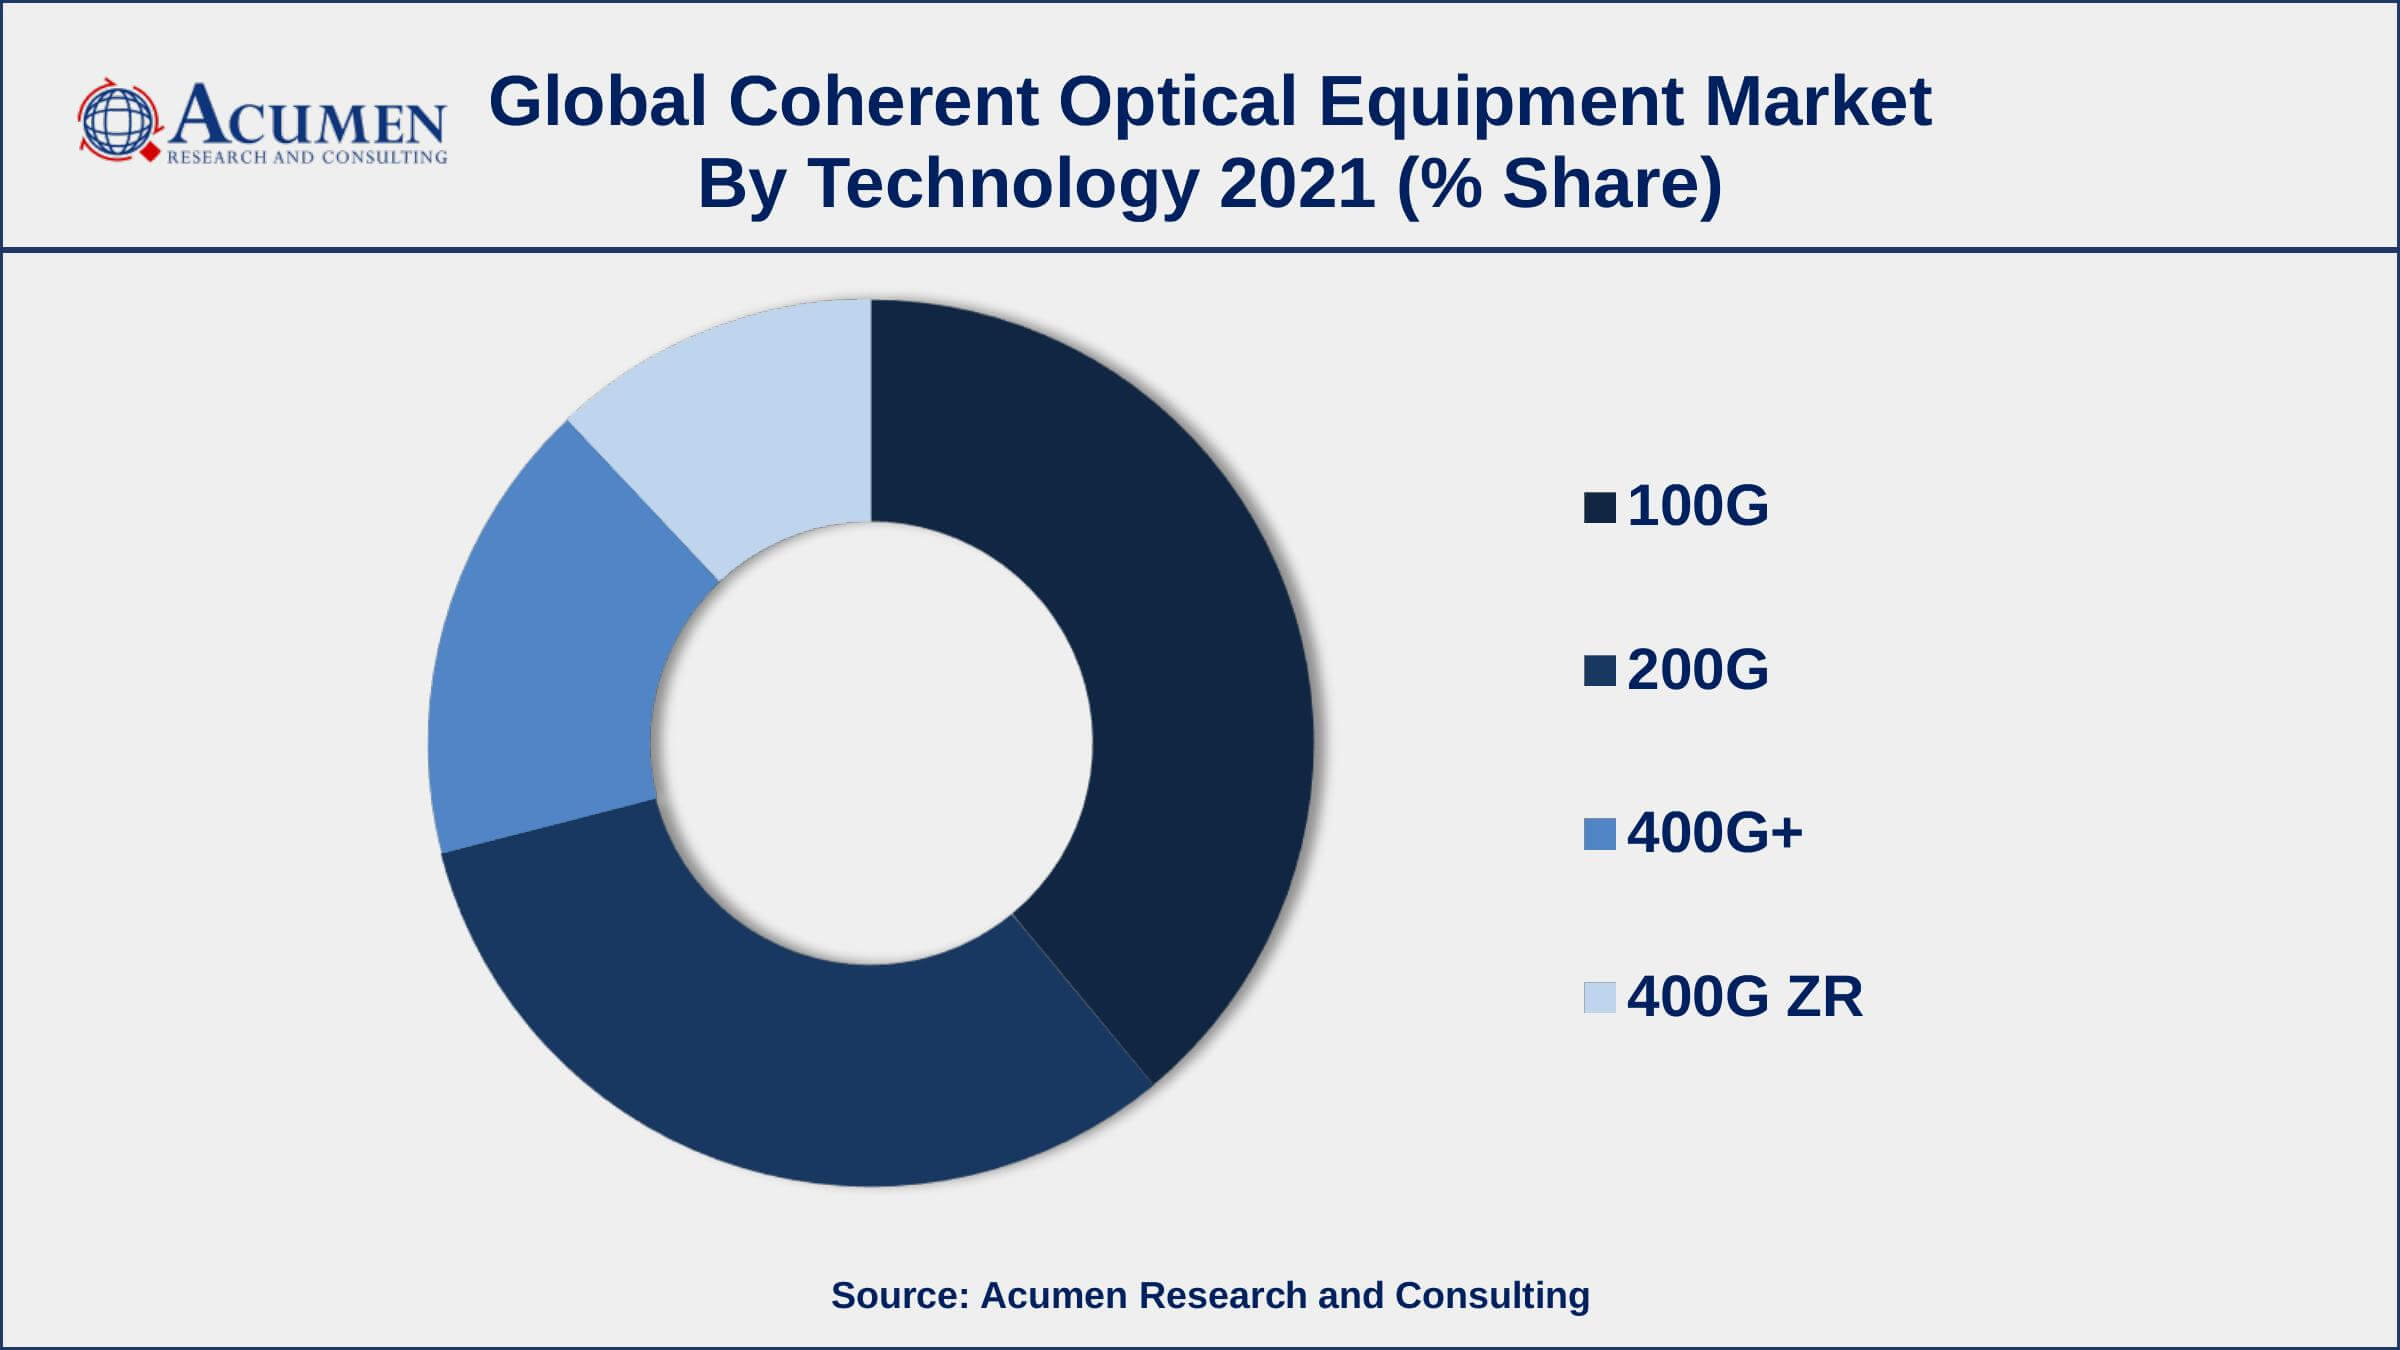 By technology, 100G segment generated about 39% market share in 2021